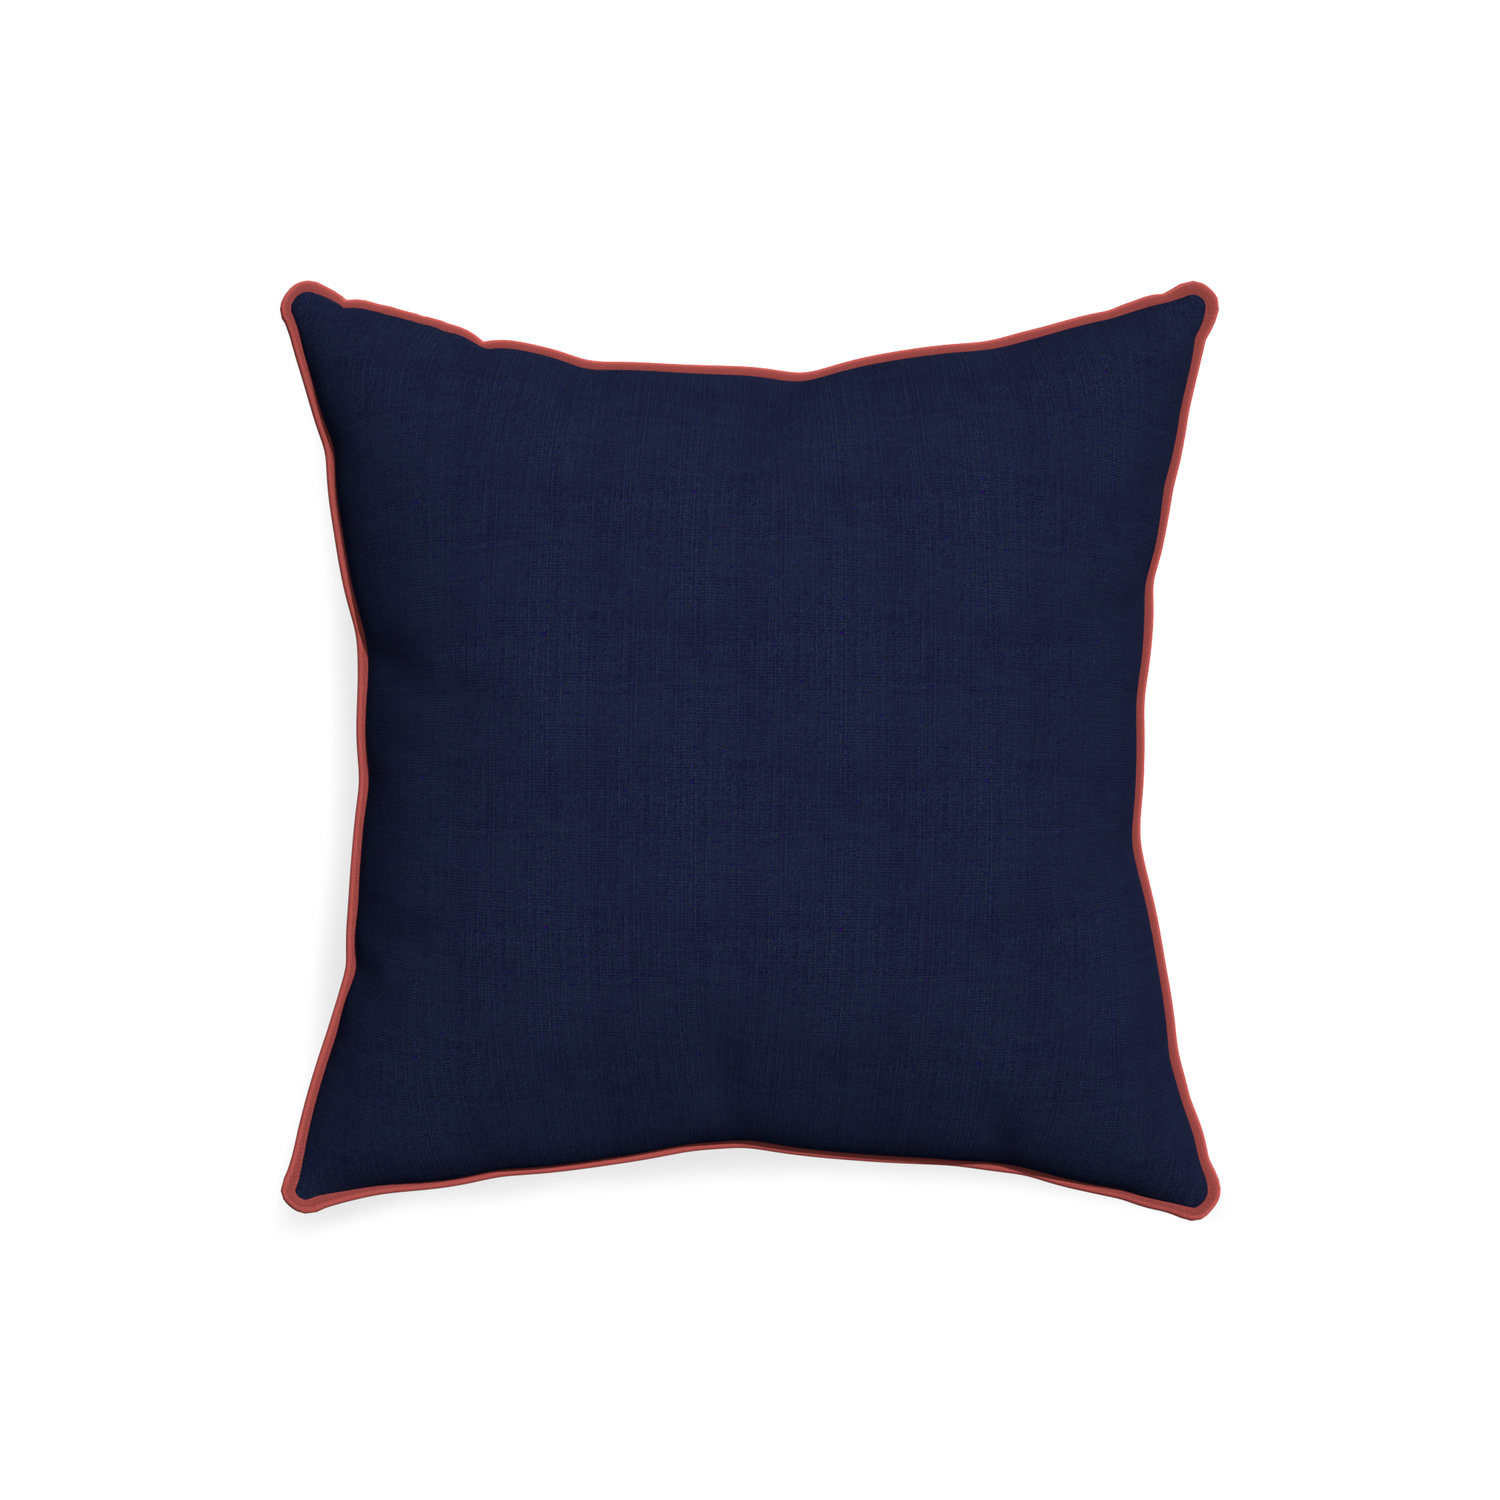 20-square midnight custom pillow with c piping on white background